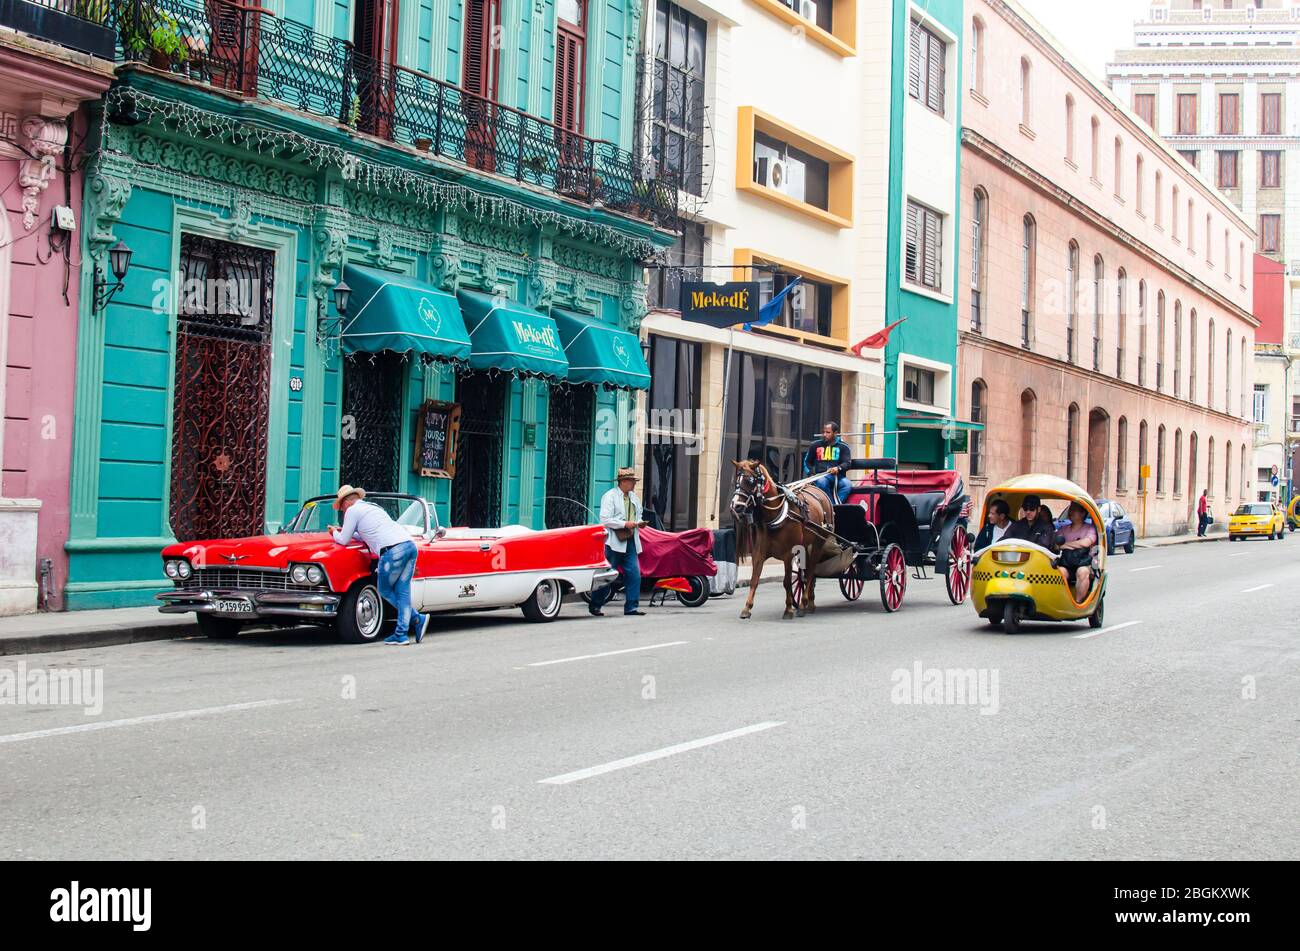 Captivating snapshot of Old Havana featuring a classic car, a cocotaxi, and horse-drawn carriage, defining the iconic scene. Stock Photo